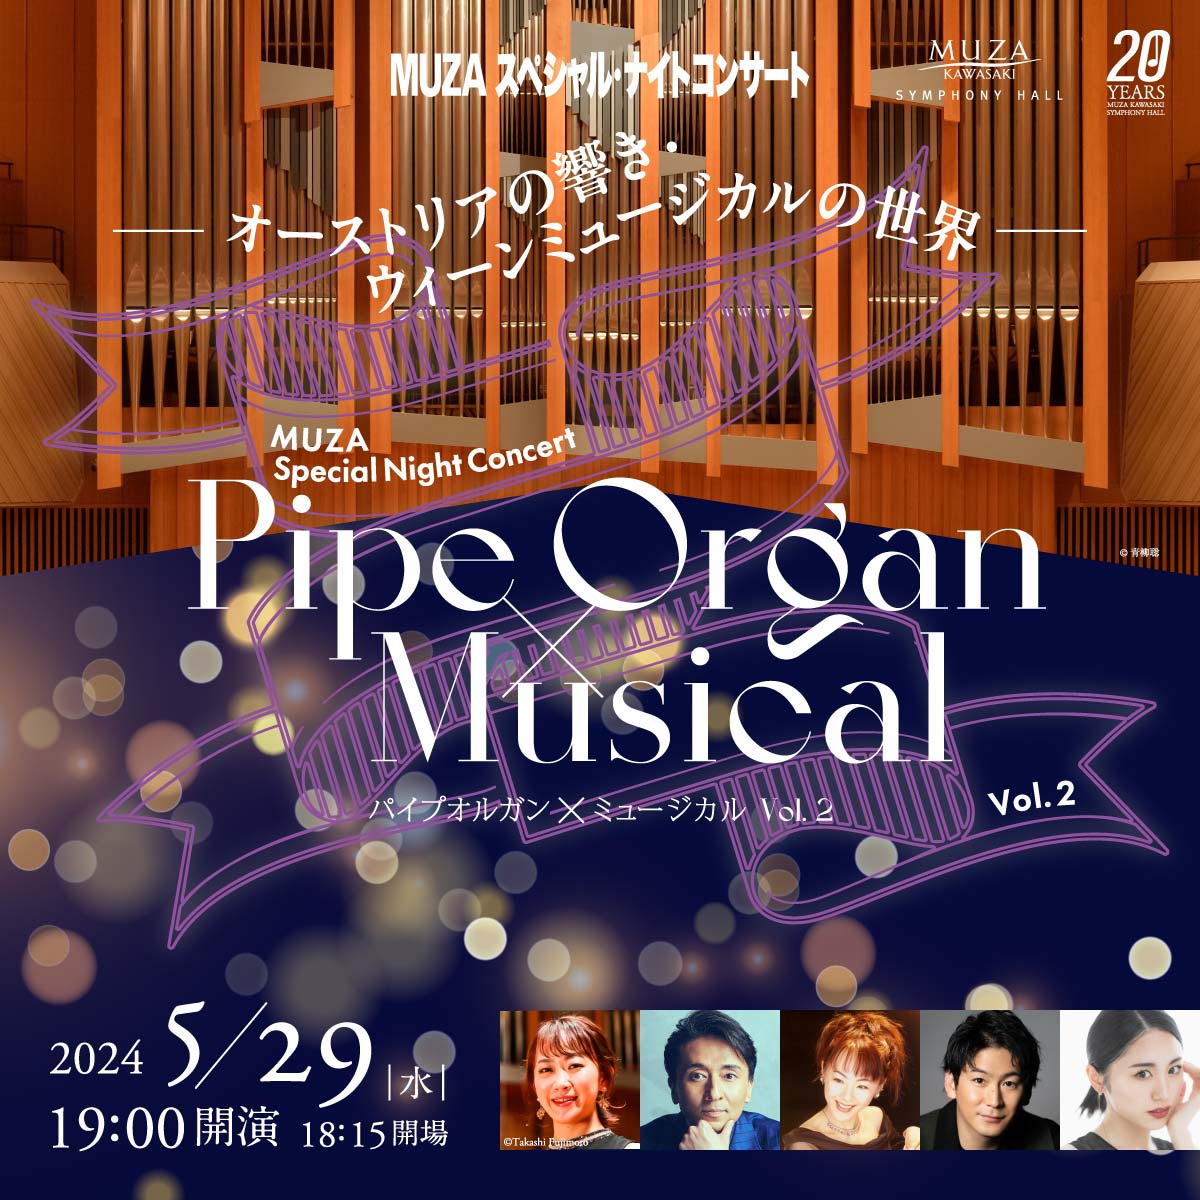 MUZA Special Night Concert Pipe Organ × Musical Vol.2 Date/Time Wed 29 May 2024 19:00 18:15 Doors Open